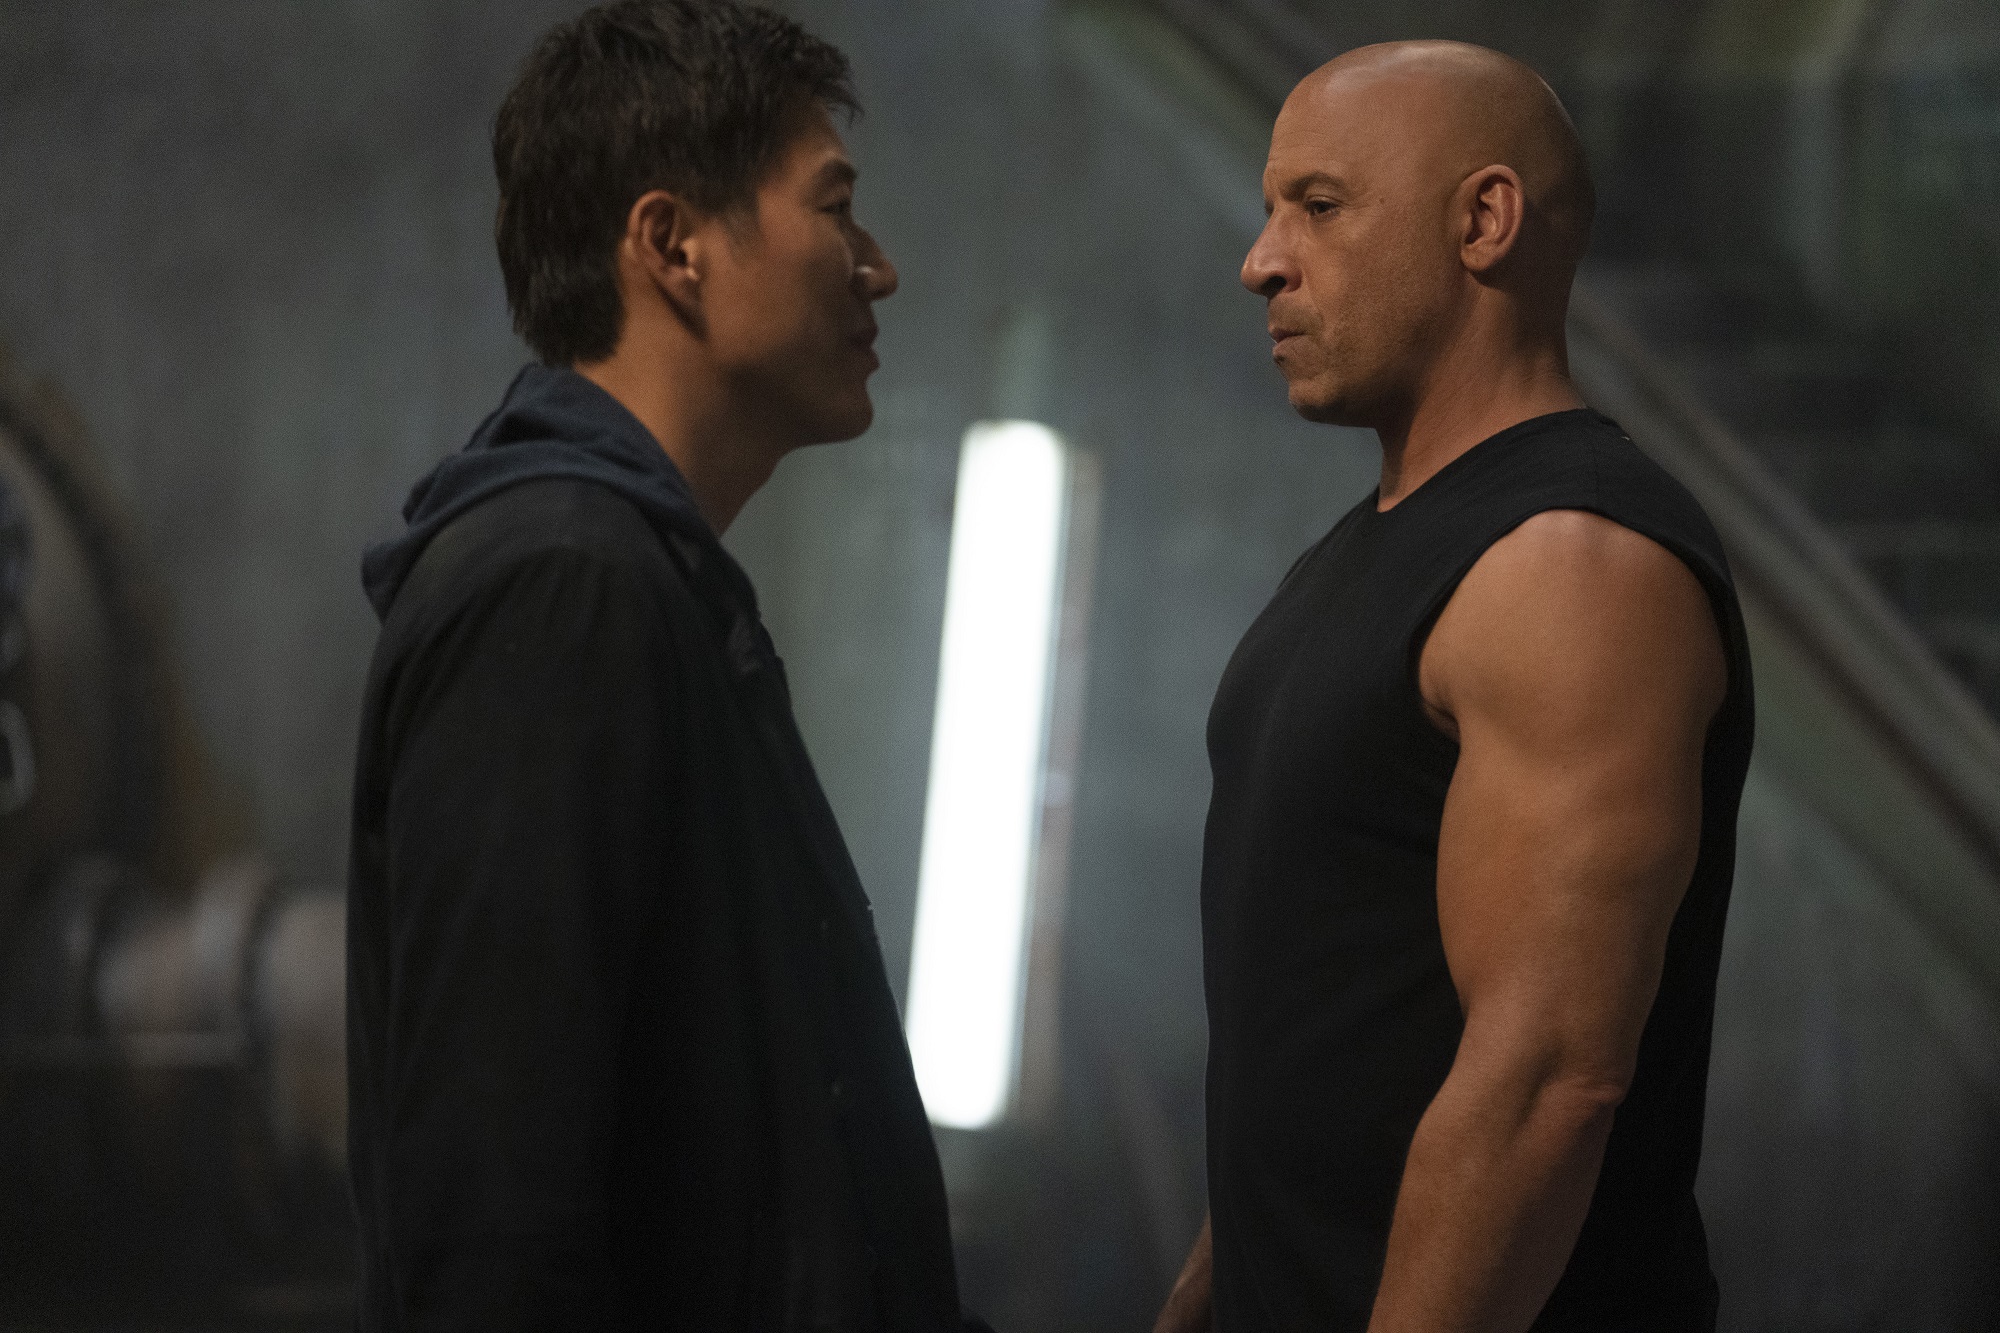 Sung Kang and Vin Diesel face off in F9